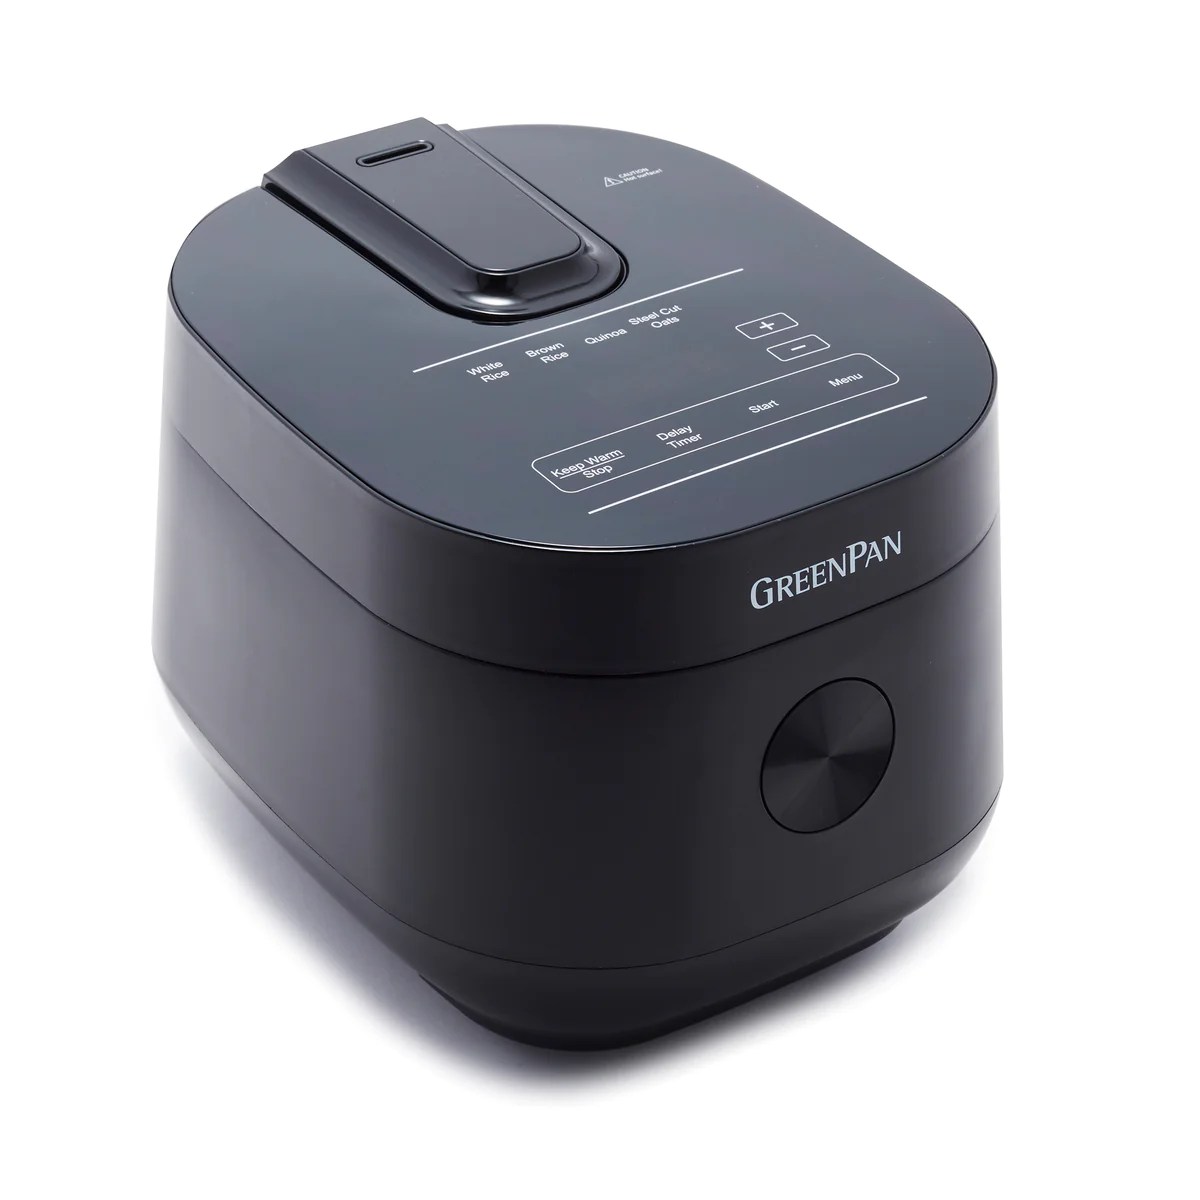 a black greenpan rice cooker, on sale for thanksgiving